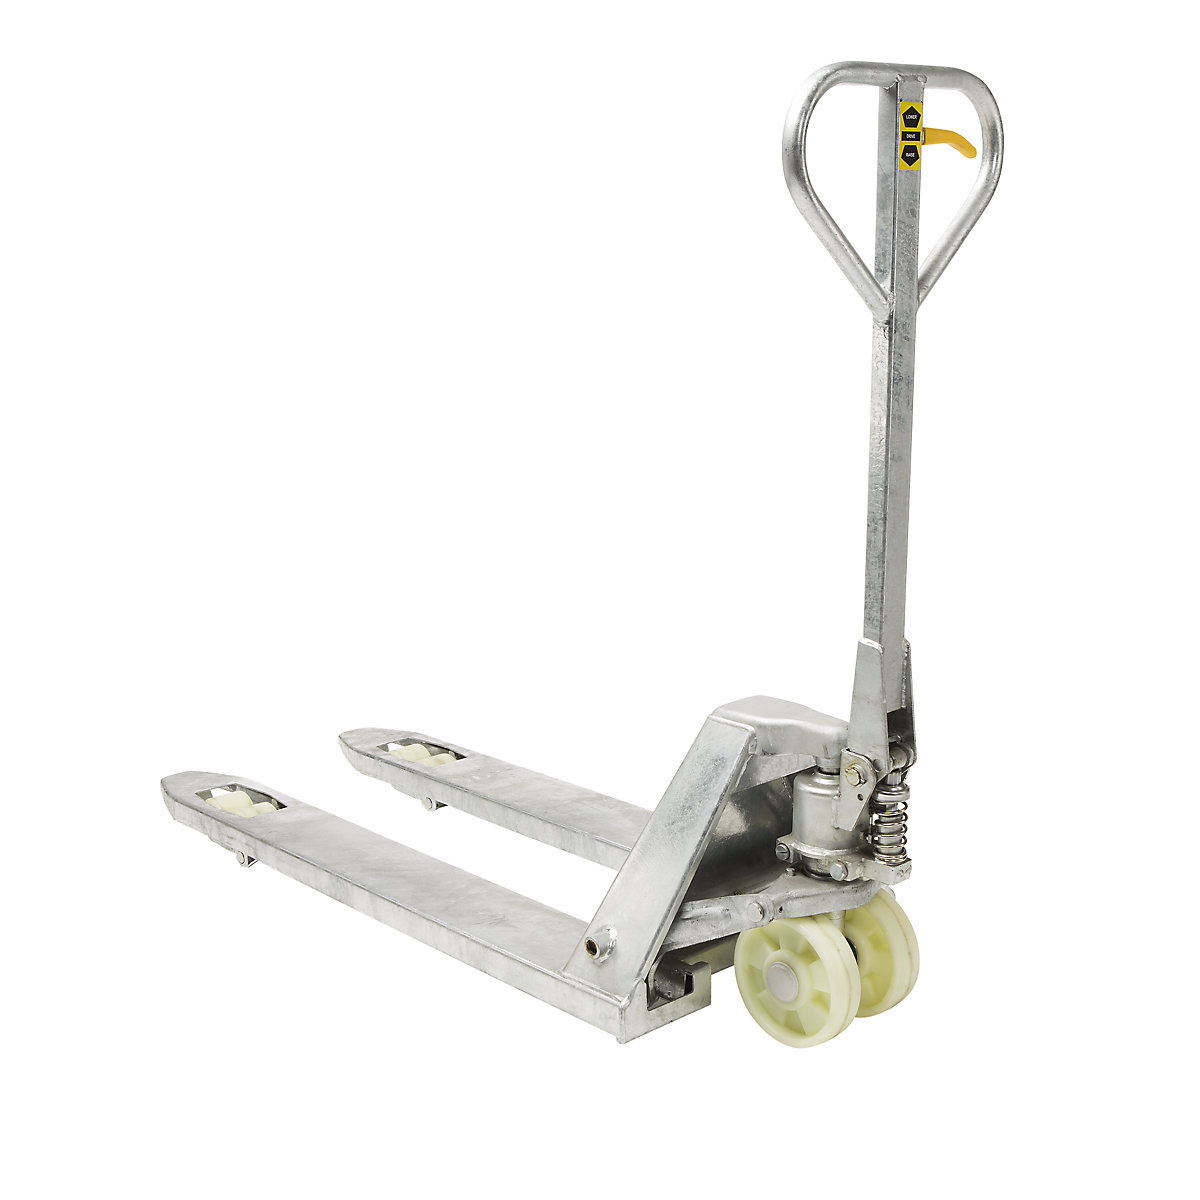 Hot dip galvanised pallet truck, for outdoor use, max. load 2500 kg